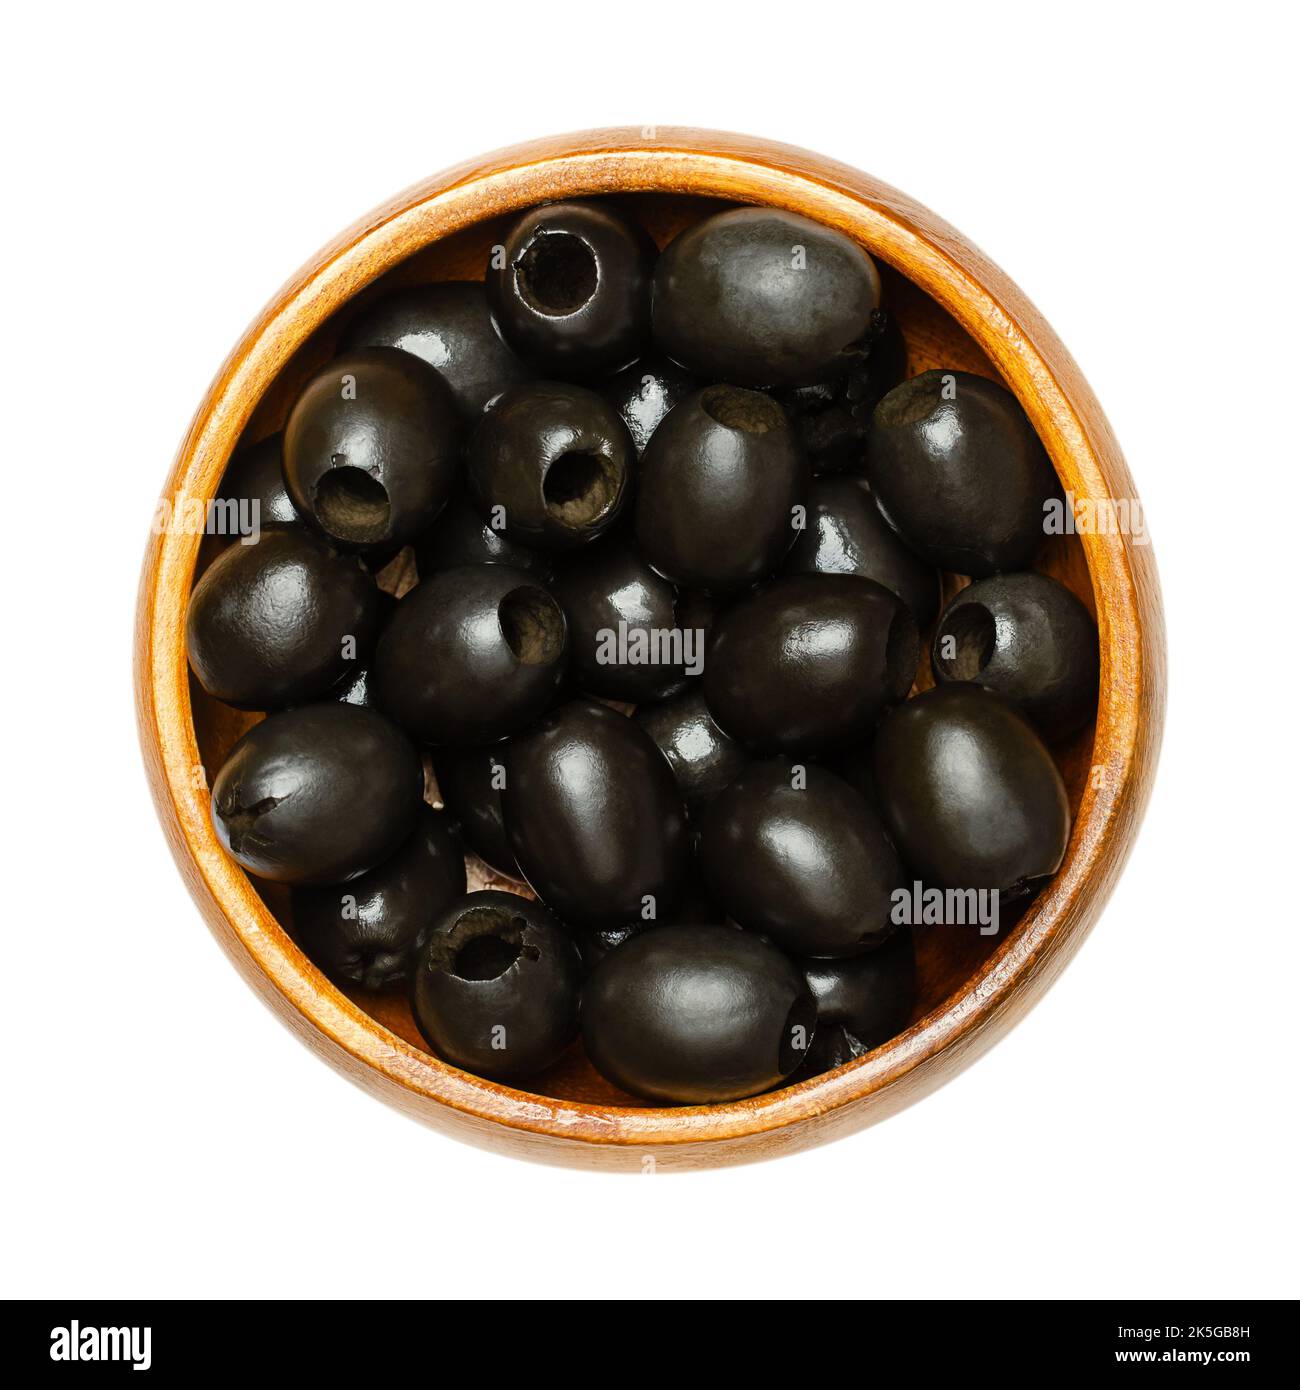 Hojiblanca, pitted black olives, in a wooden bowl. European olive, Olea europaea, a cultivar from Lucena in Spain, mainly grown in Andalucia. Stock Photo